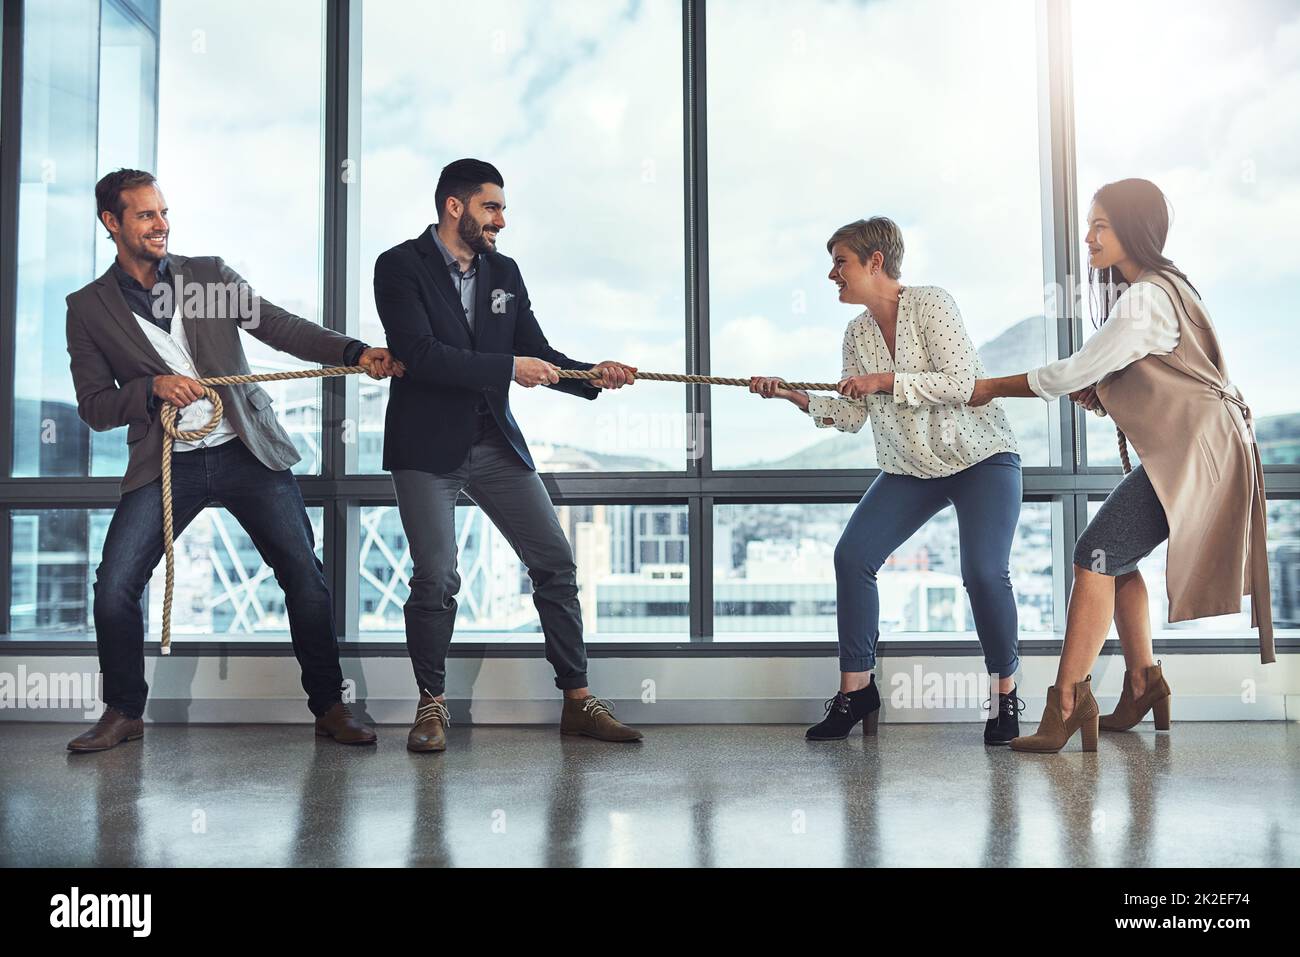 There are many challenges youll have to face in business. Shot of a group of businesspeople pulling on a rope during tug of war in an office. Stock Photo